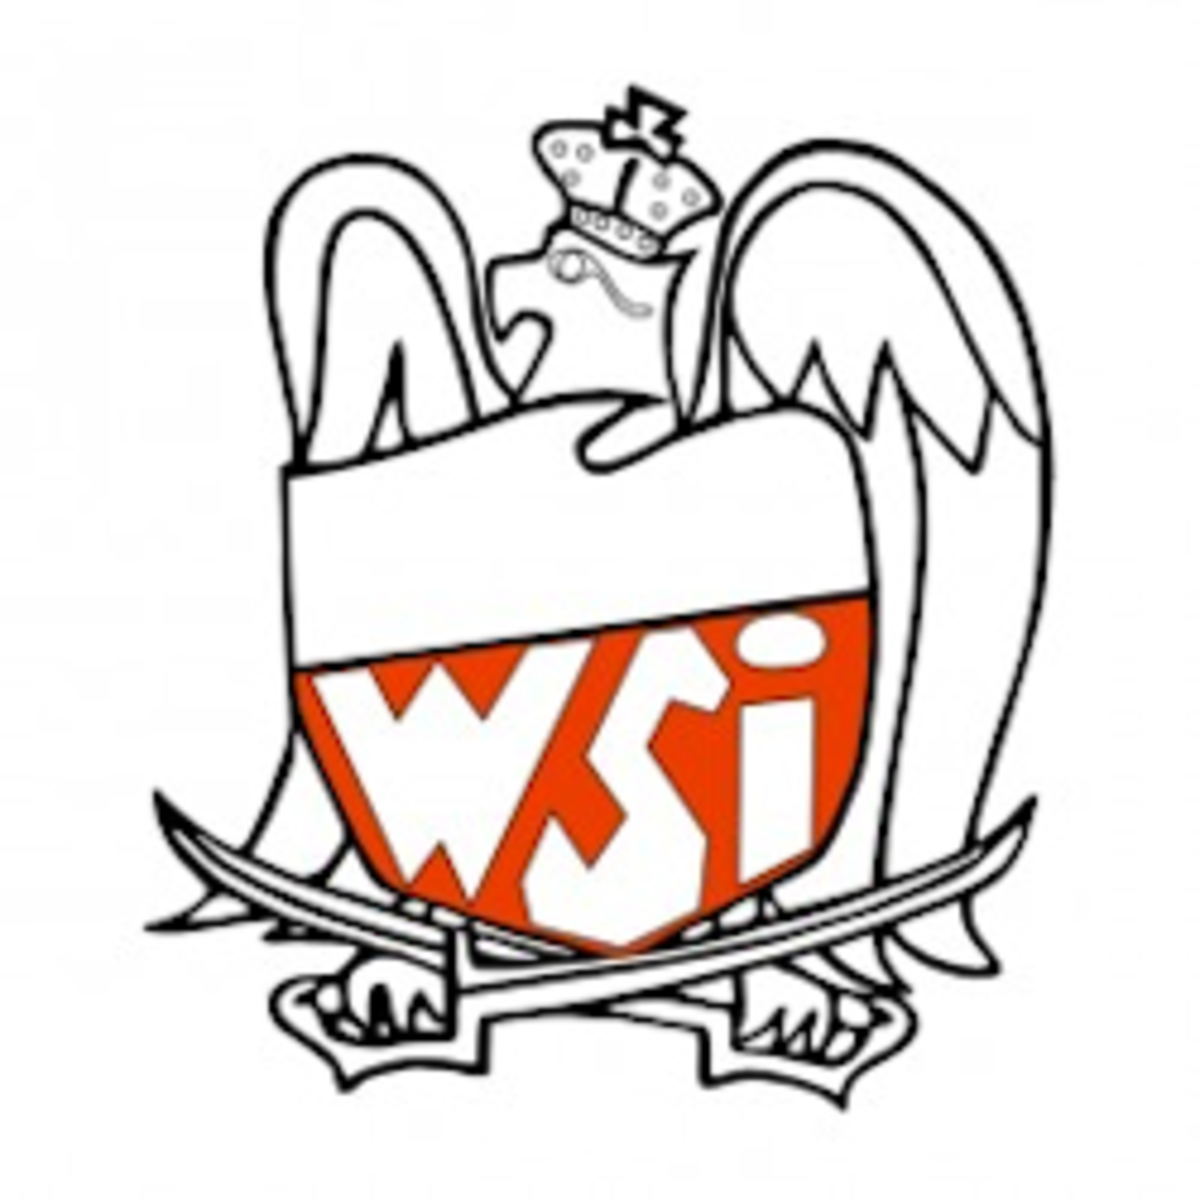 Emblem by the Polish Military Information Services.